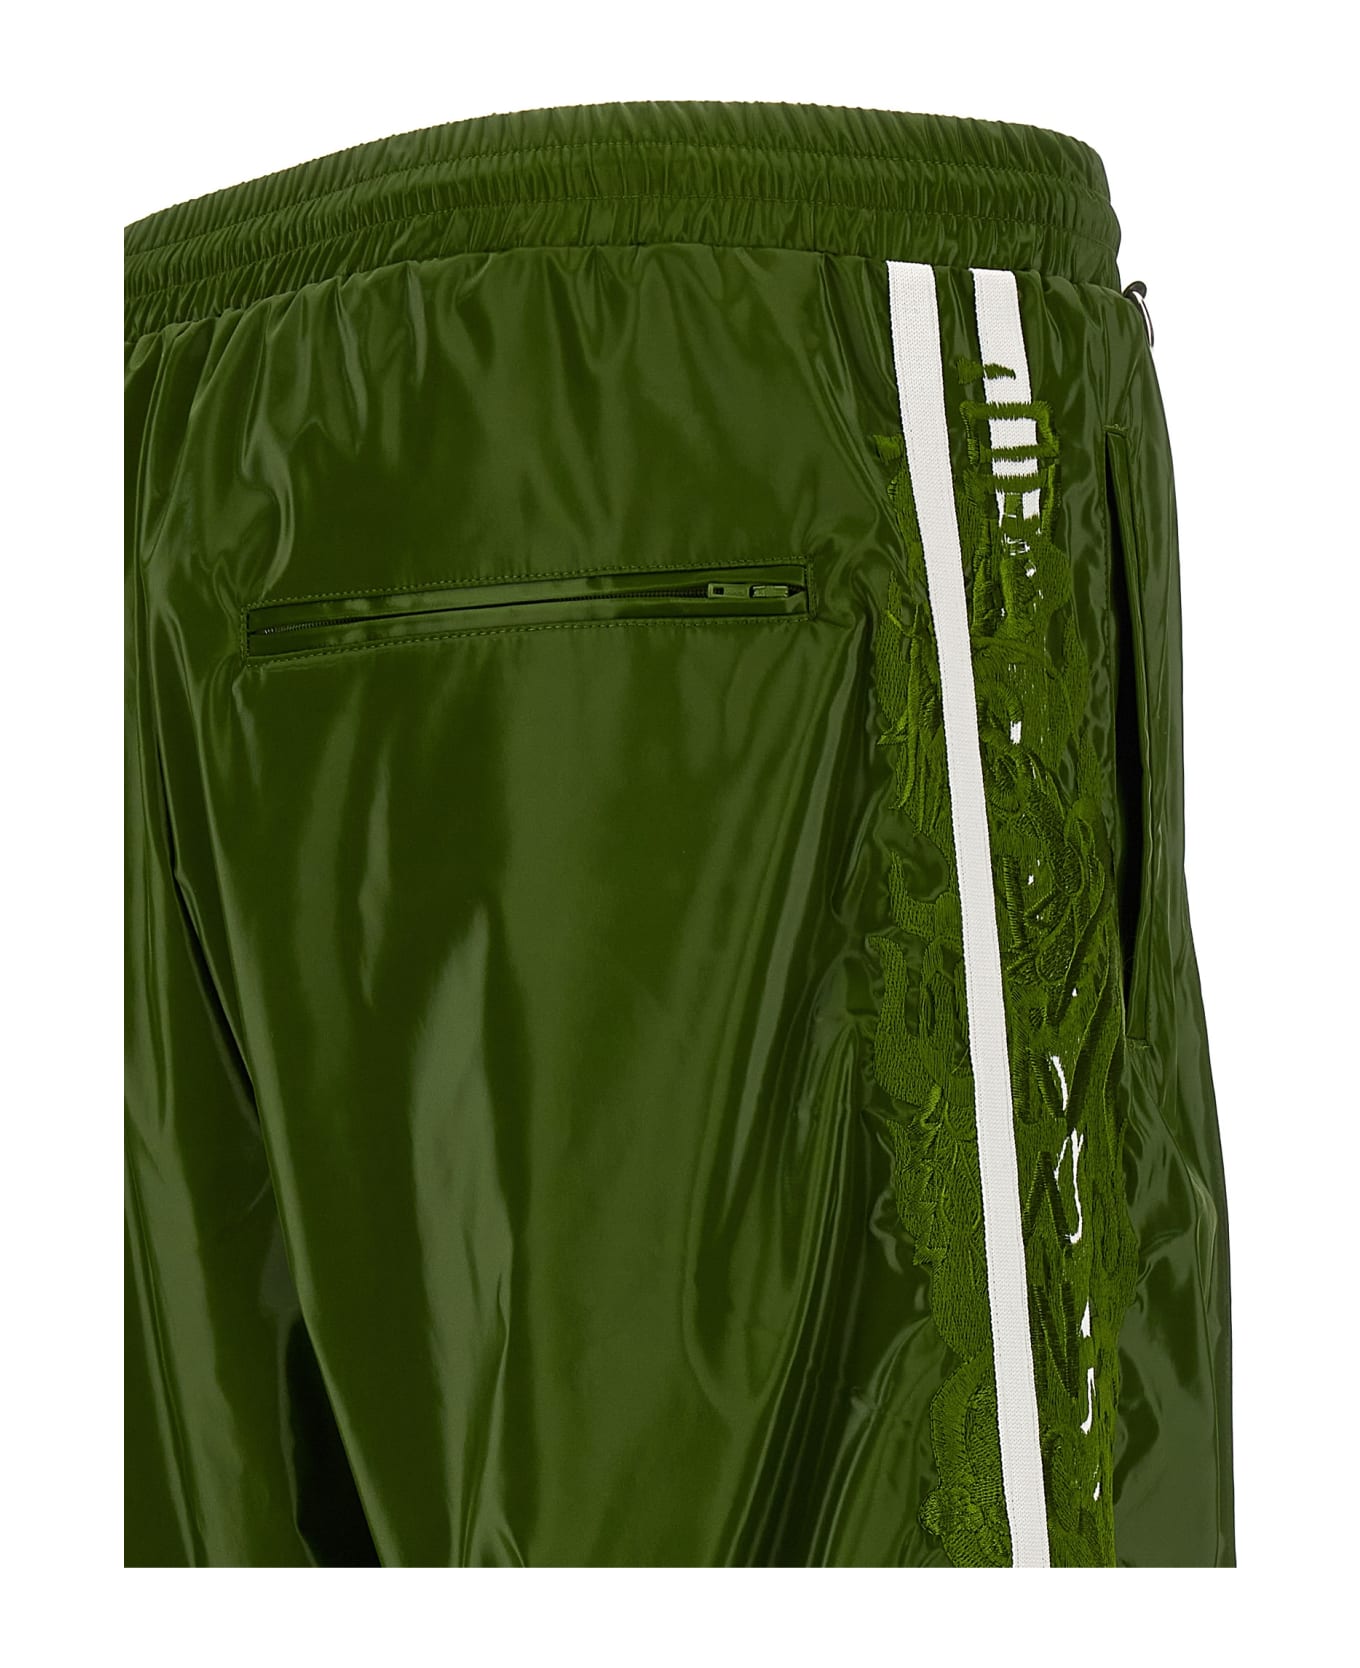 doublet 'laminate Track' Joggers - Green